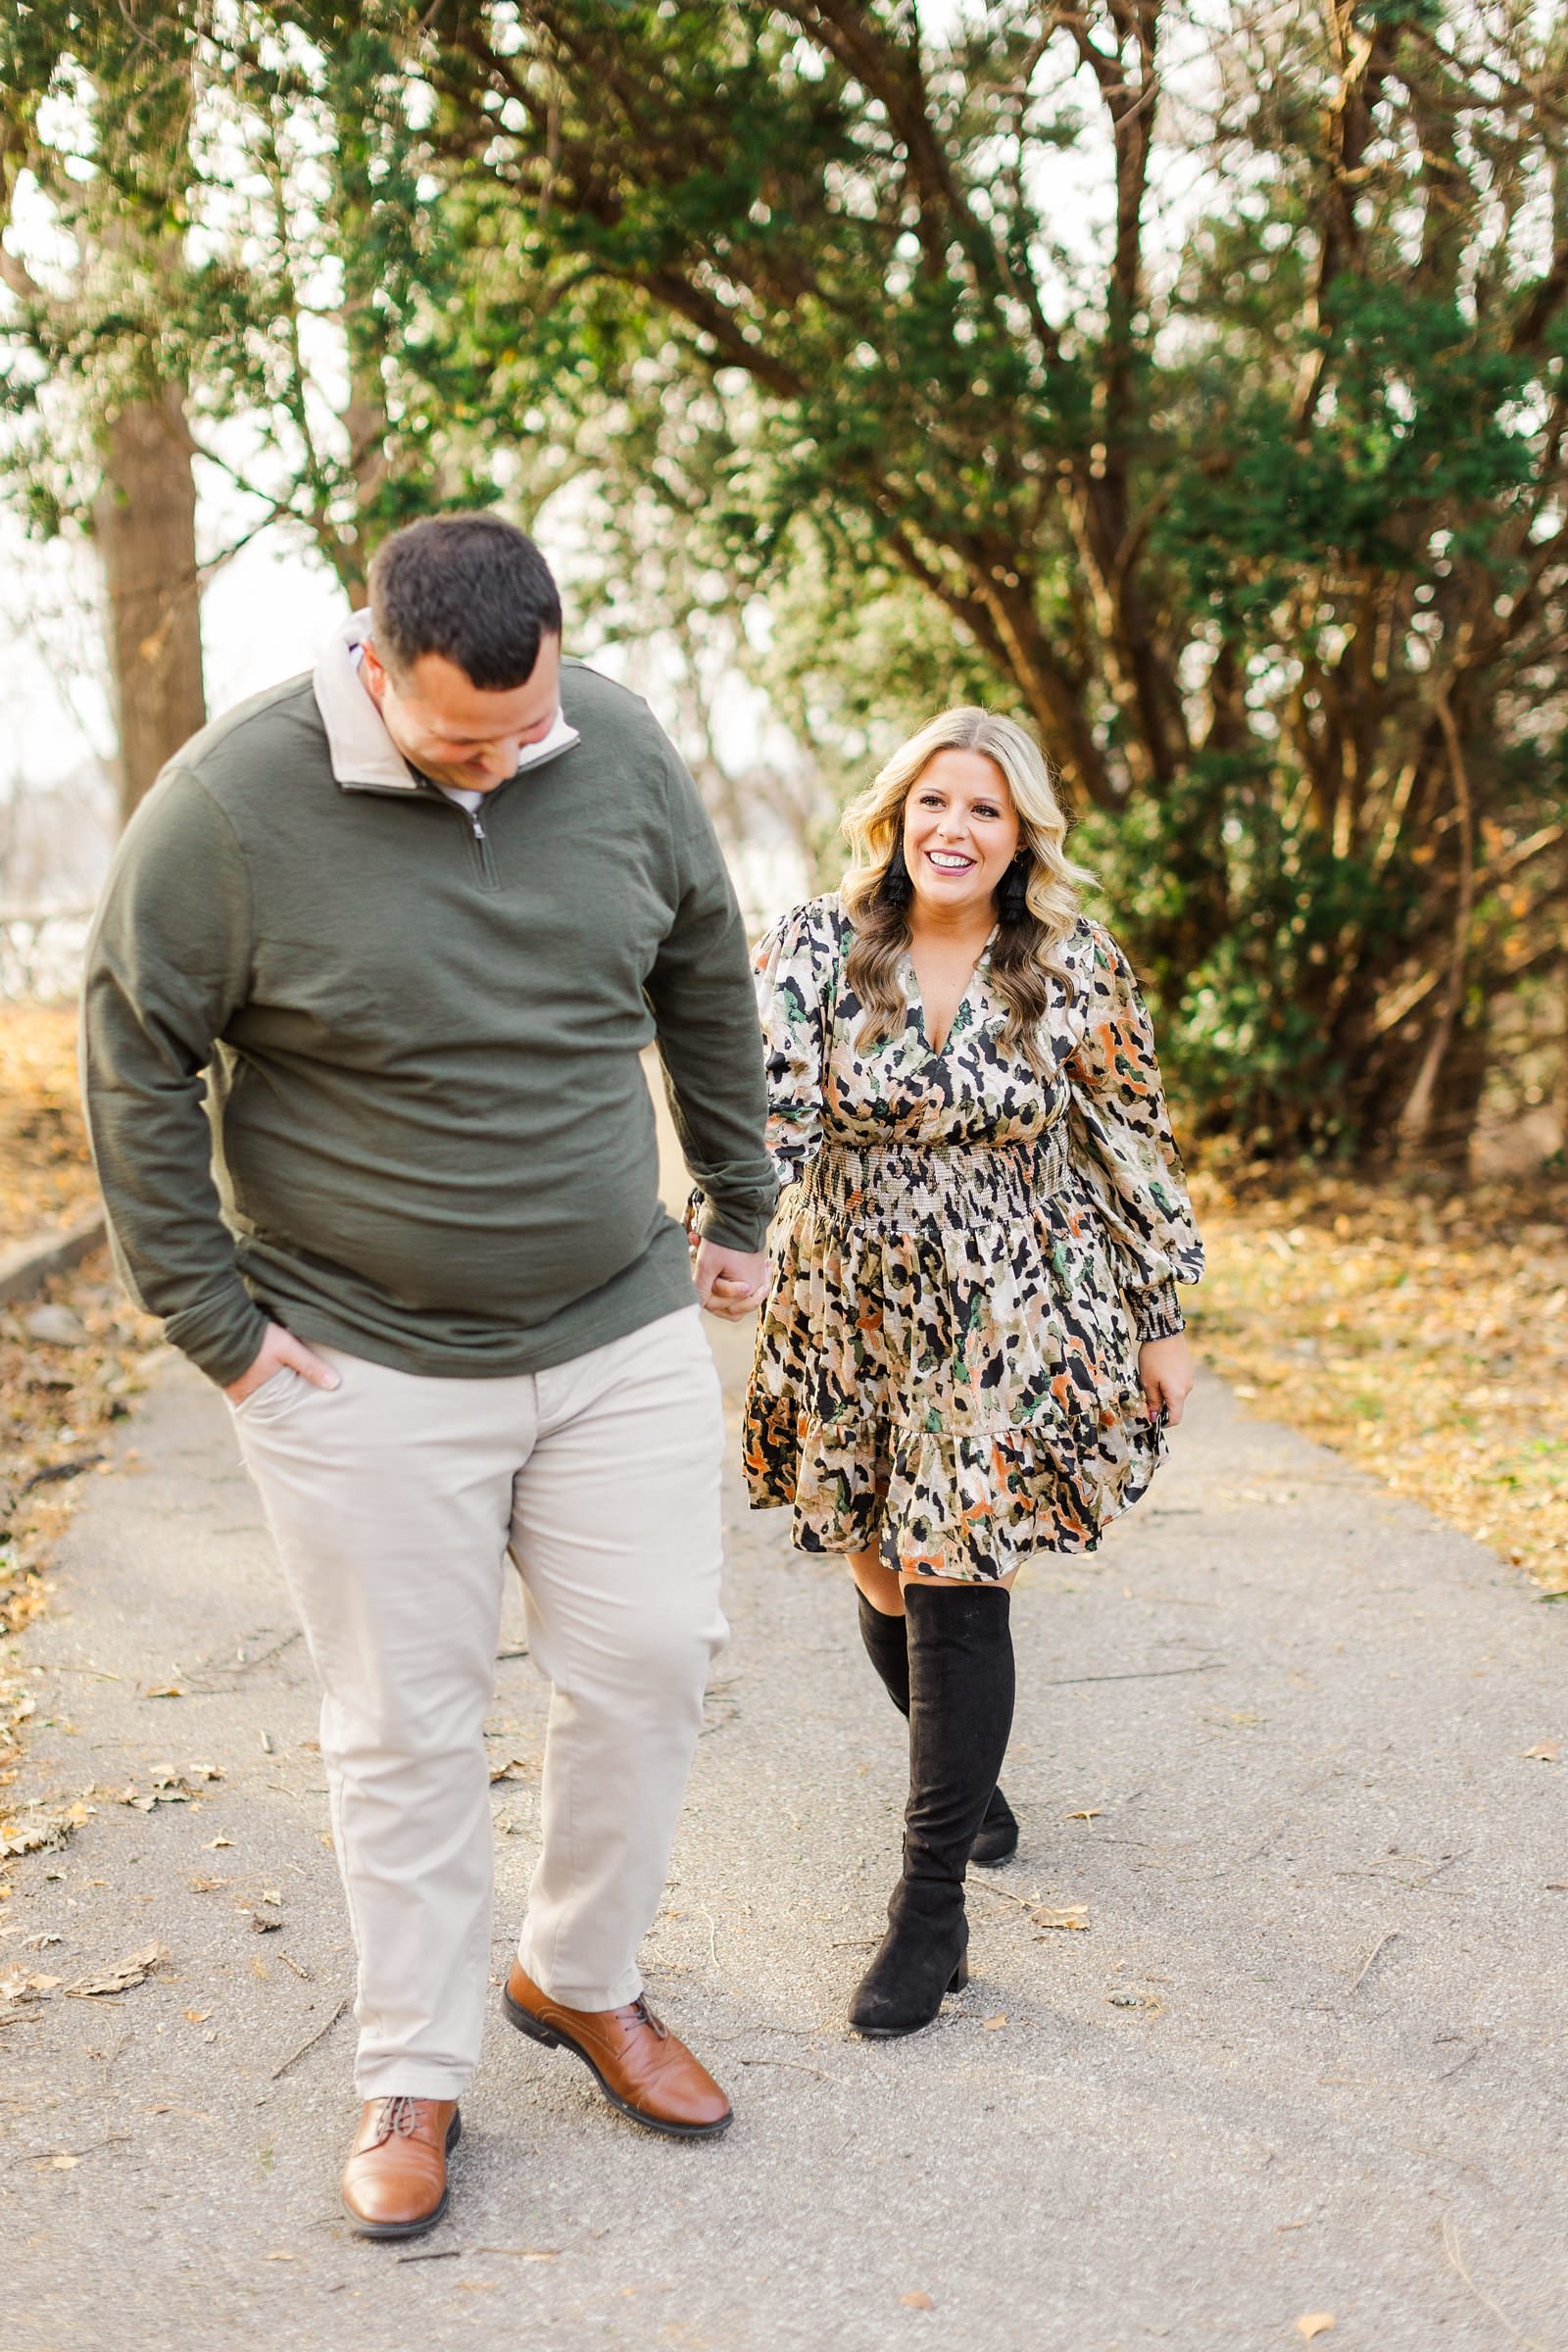 A Winter Downtown Newburgh Engagement Session | Paige and Dylan13.jpg